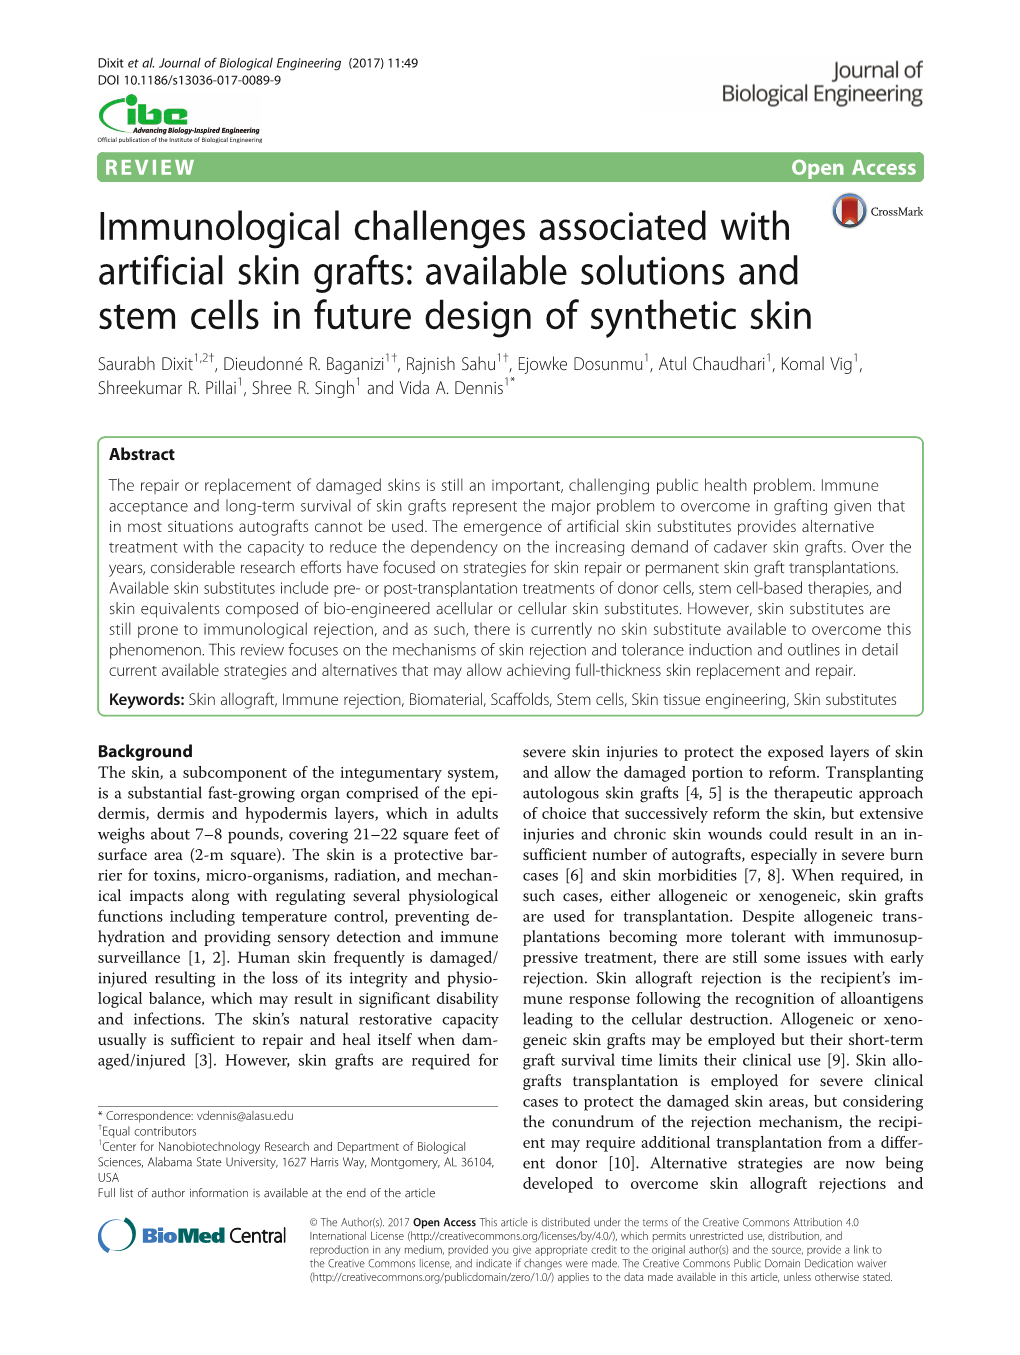 Immunological Challenges Associated with Artificial Skin Grafts: Available Solutions and Stem Cells in Future Design of Synthetic Skin Saurabh Dixit1,2†, Dieudonné R